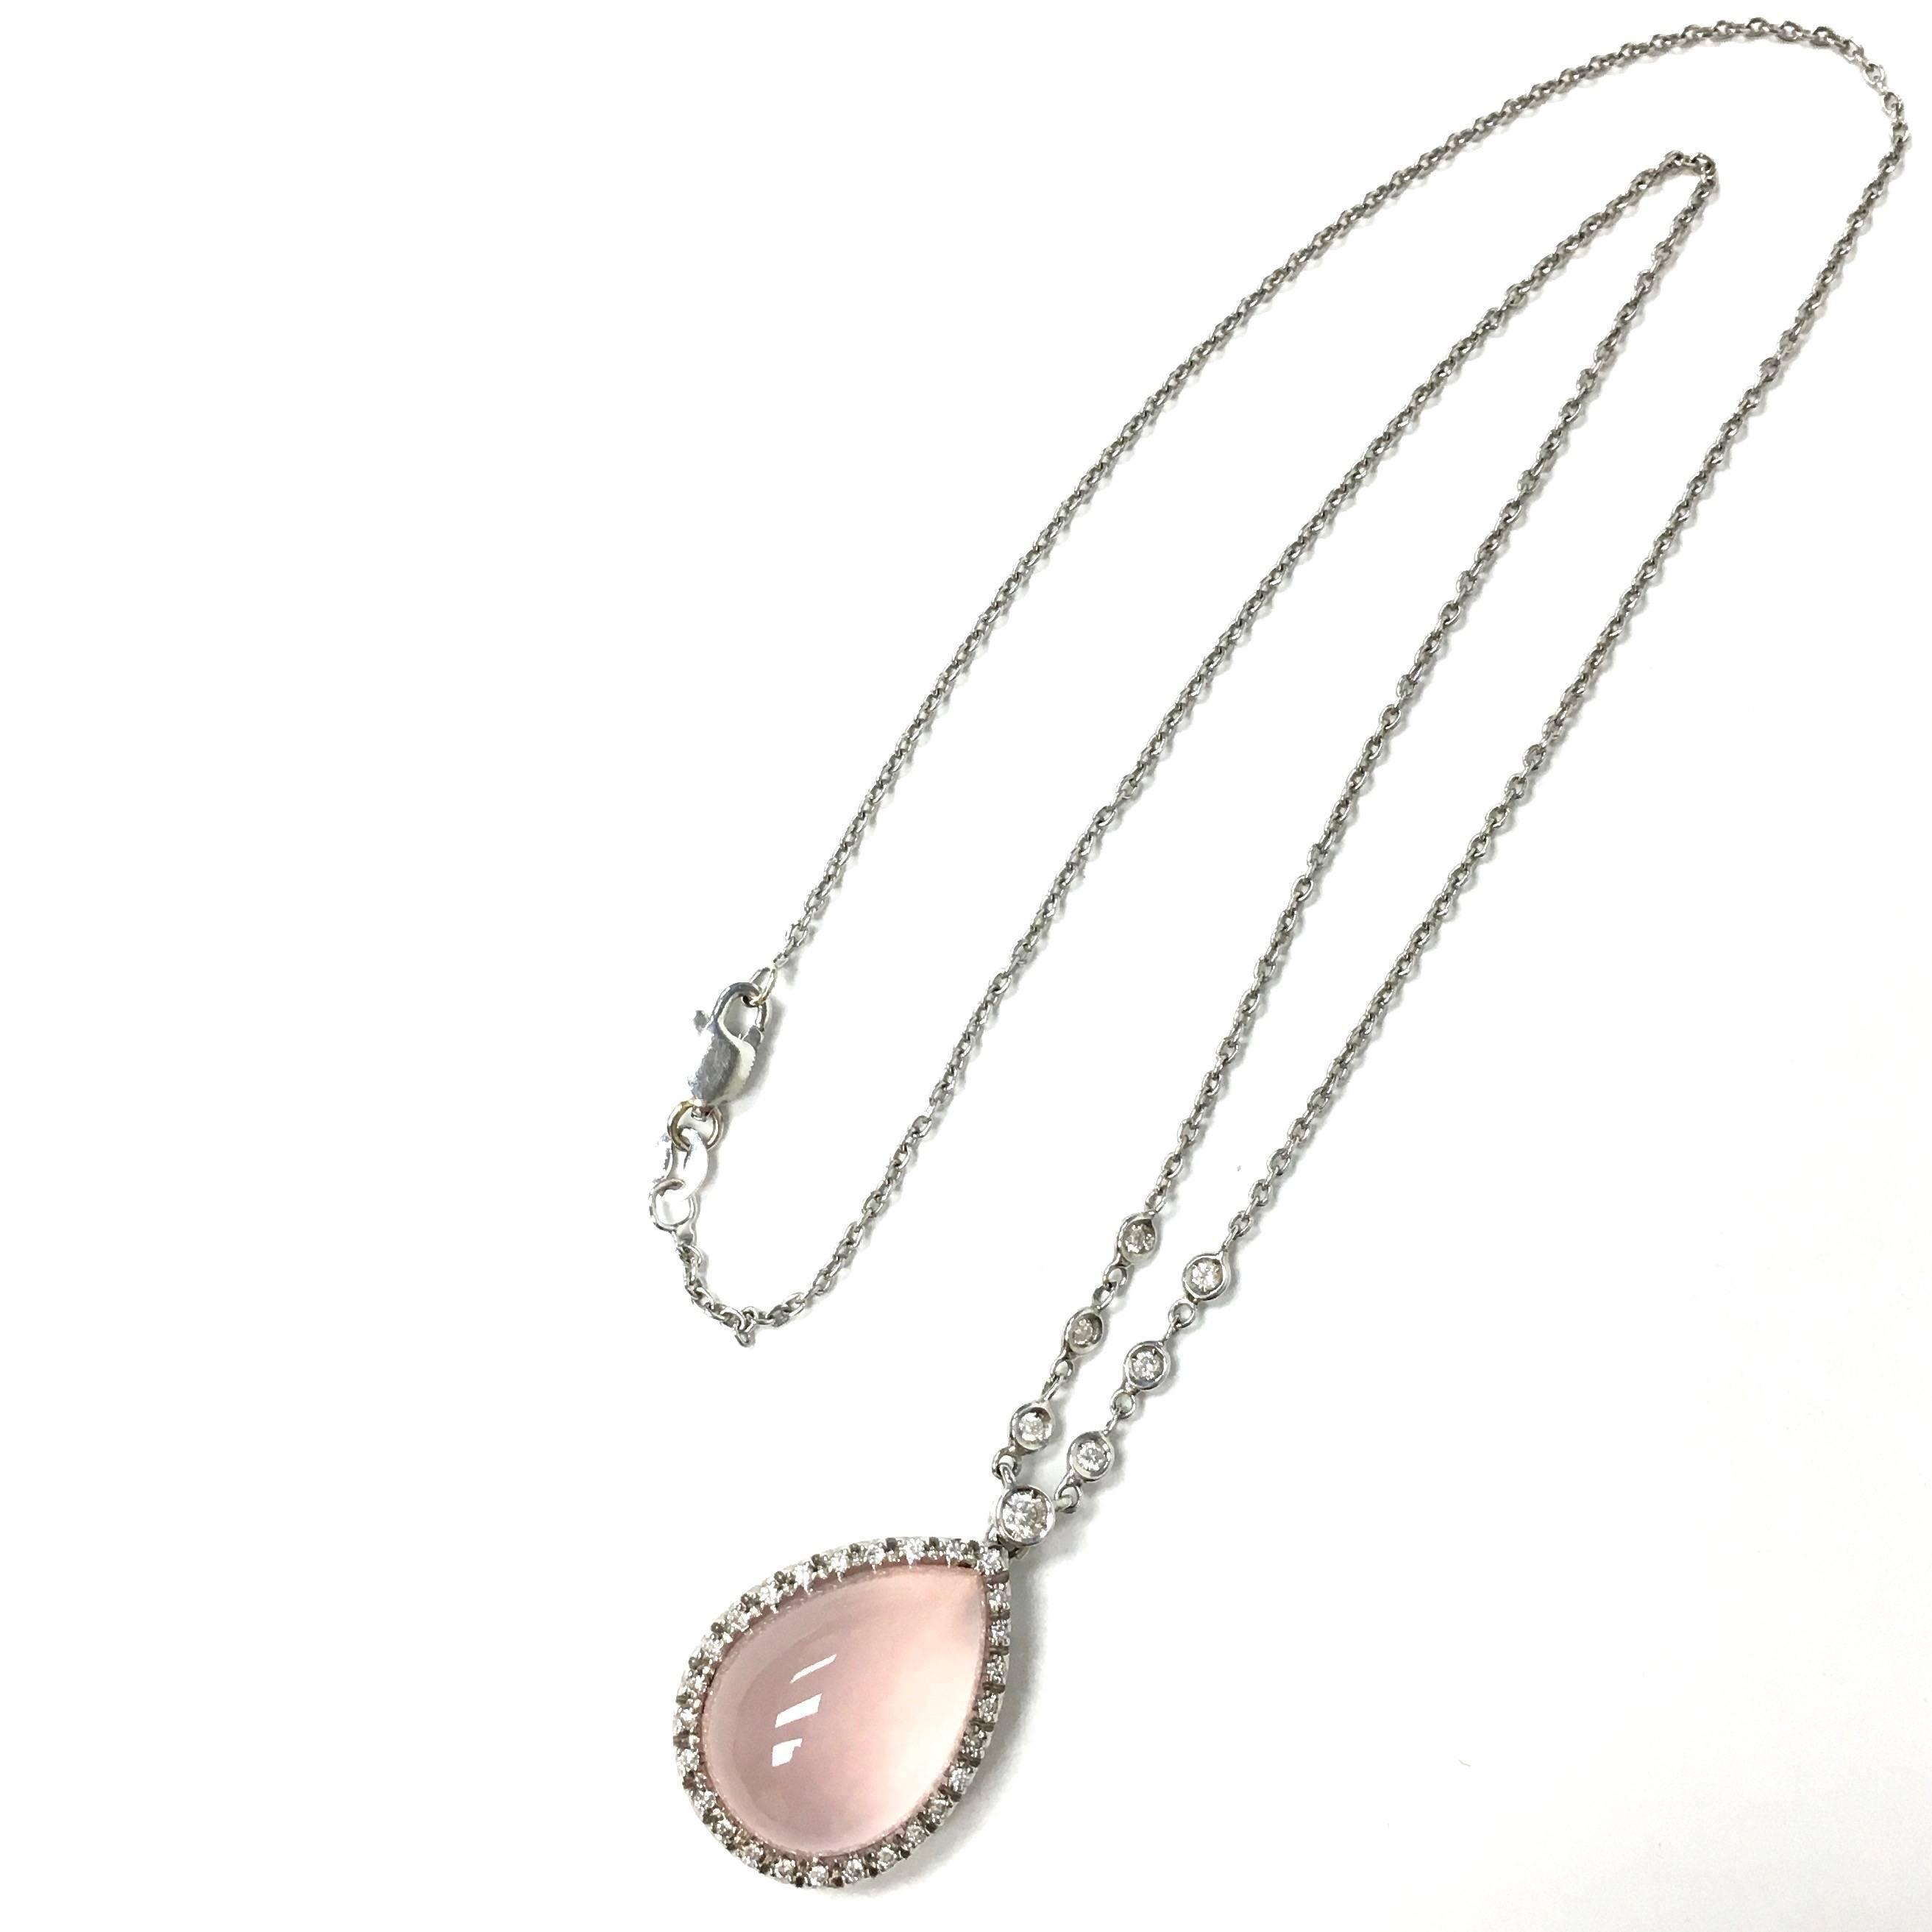 Favero stationary pendant necklace. Crafted from 18K white gold, featuring a teardrop shape rose quartz cabochon approx. 10.0ct, set within a bezel of diamonds, supported by a 16 inch length roll style chain set with seven bezel set round brilliant